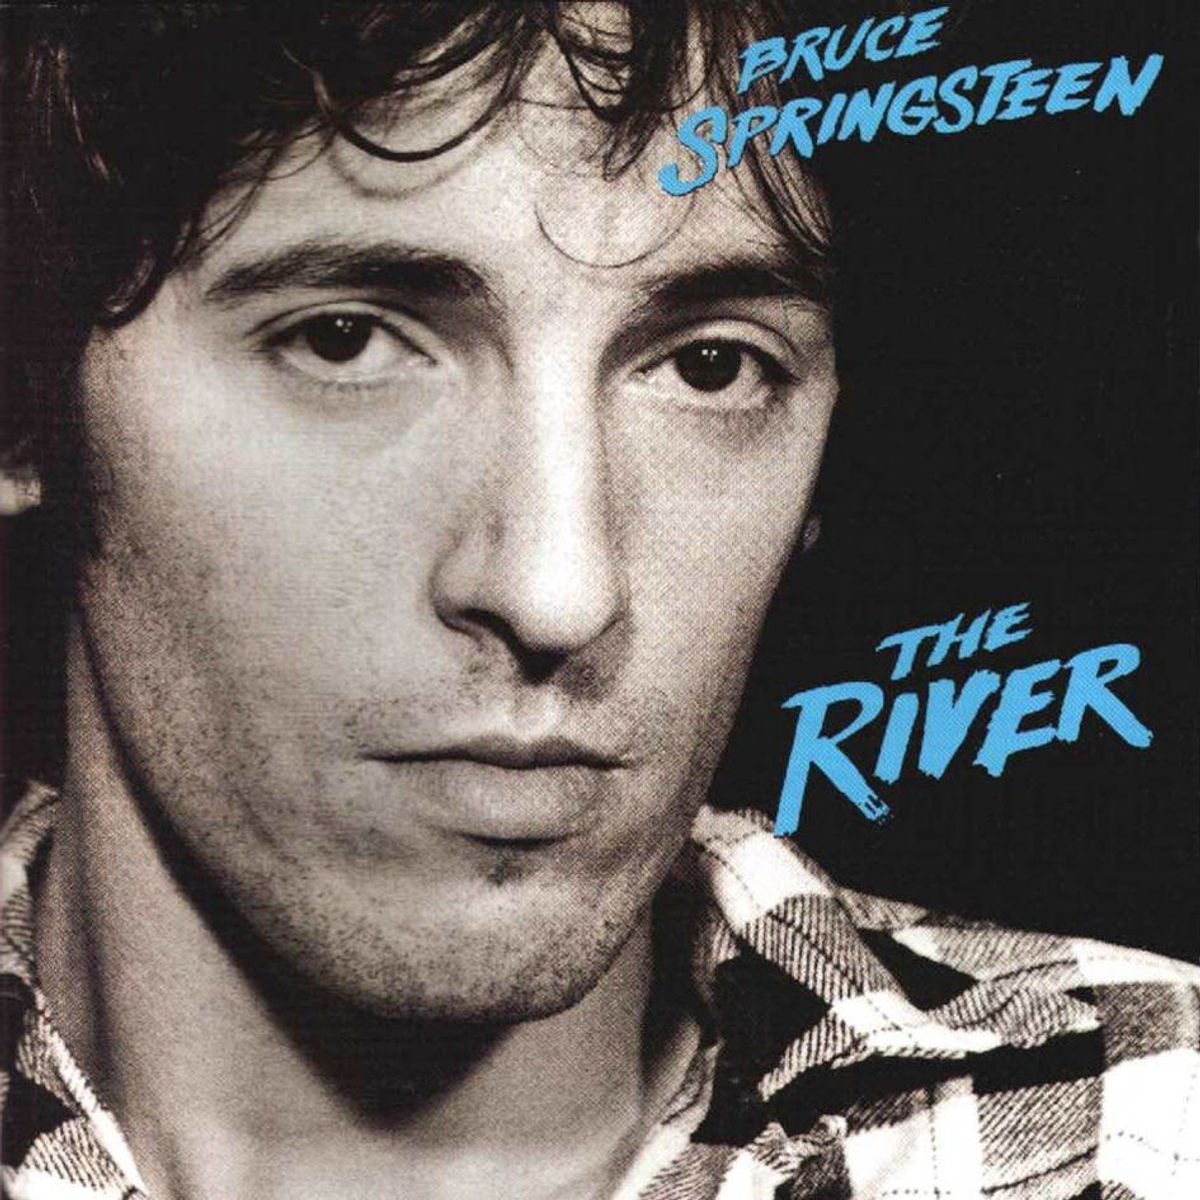 Bruce Springsteen And The E-Street Band Revisit "The River"